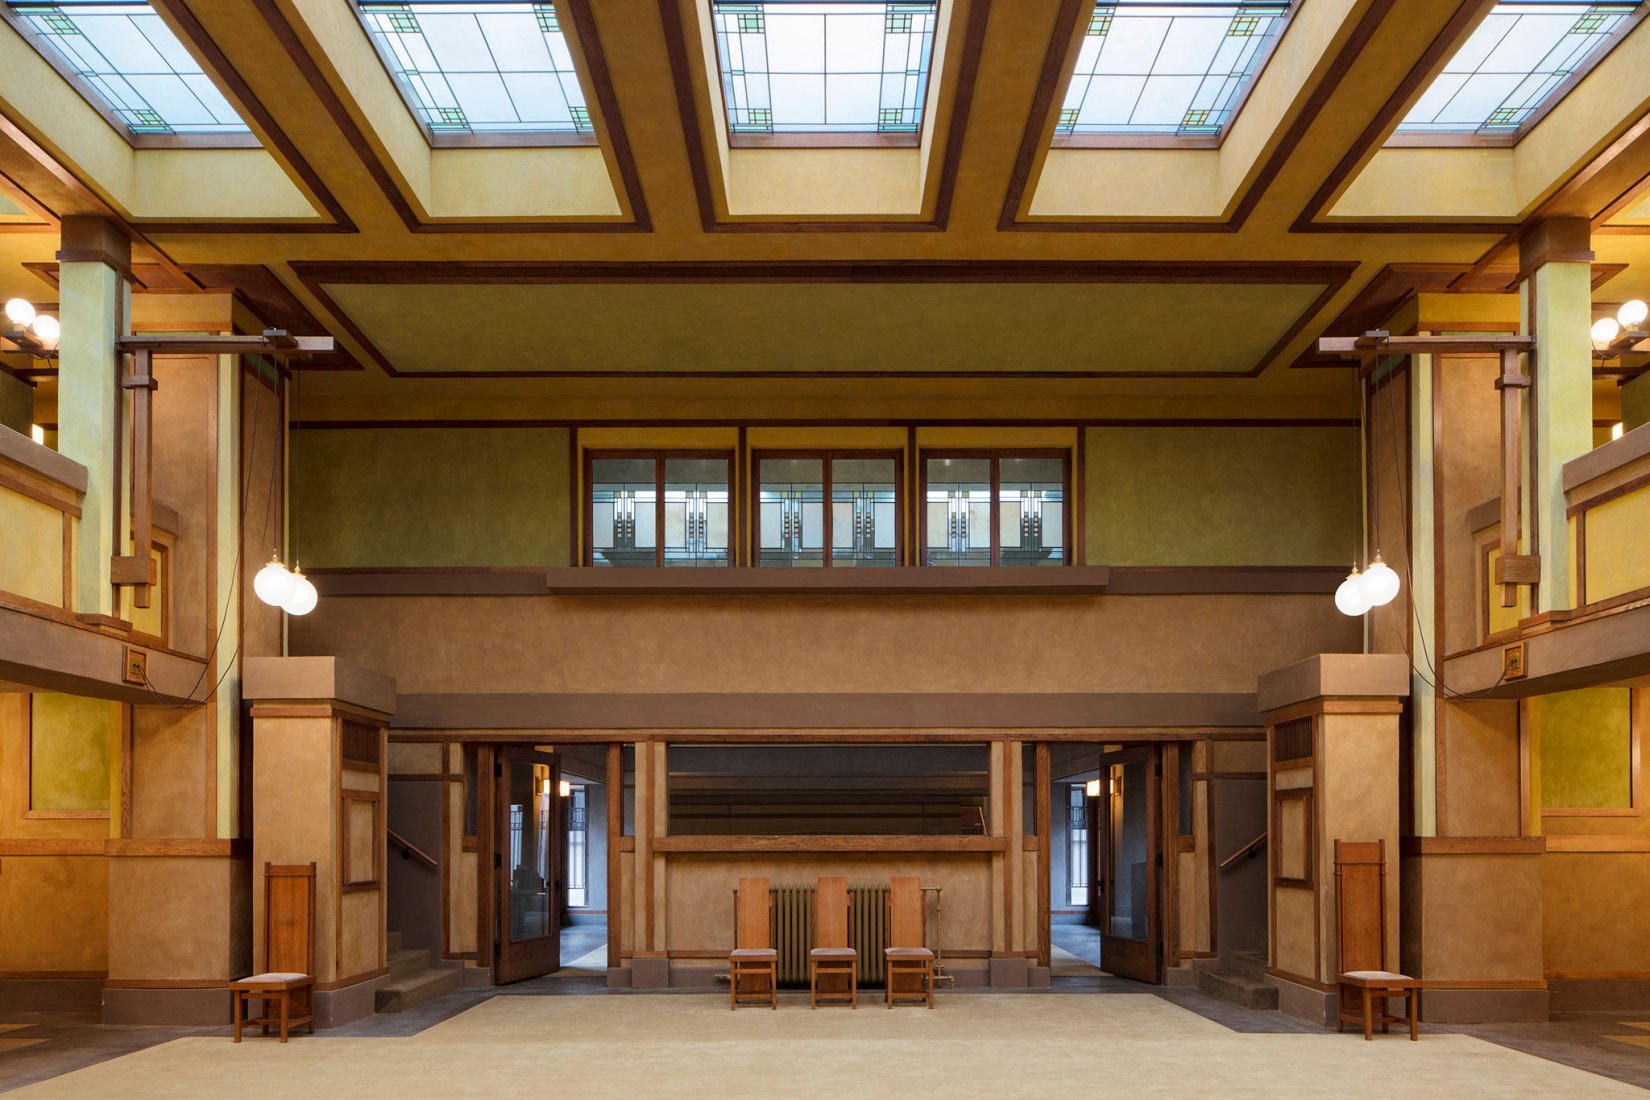 Frank Lloyd Wright, Unity Temple, Oak Park, Illinois, 1905-08. Photograph by Tom Rossiter courtesy of Harboe Architects.